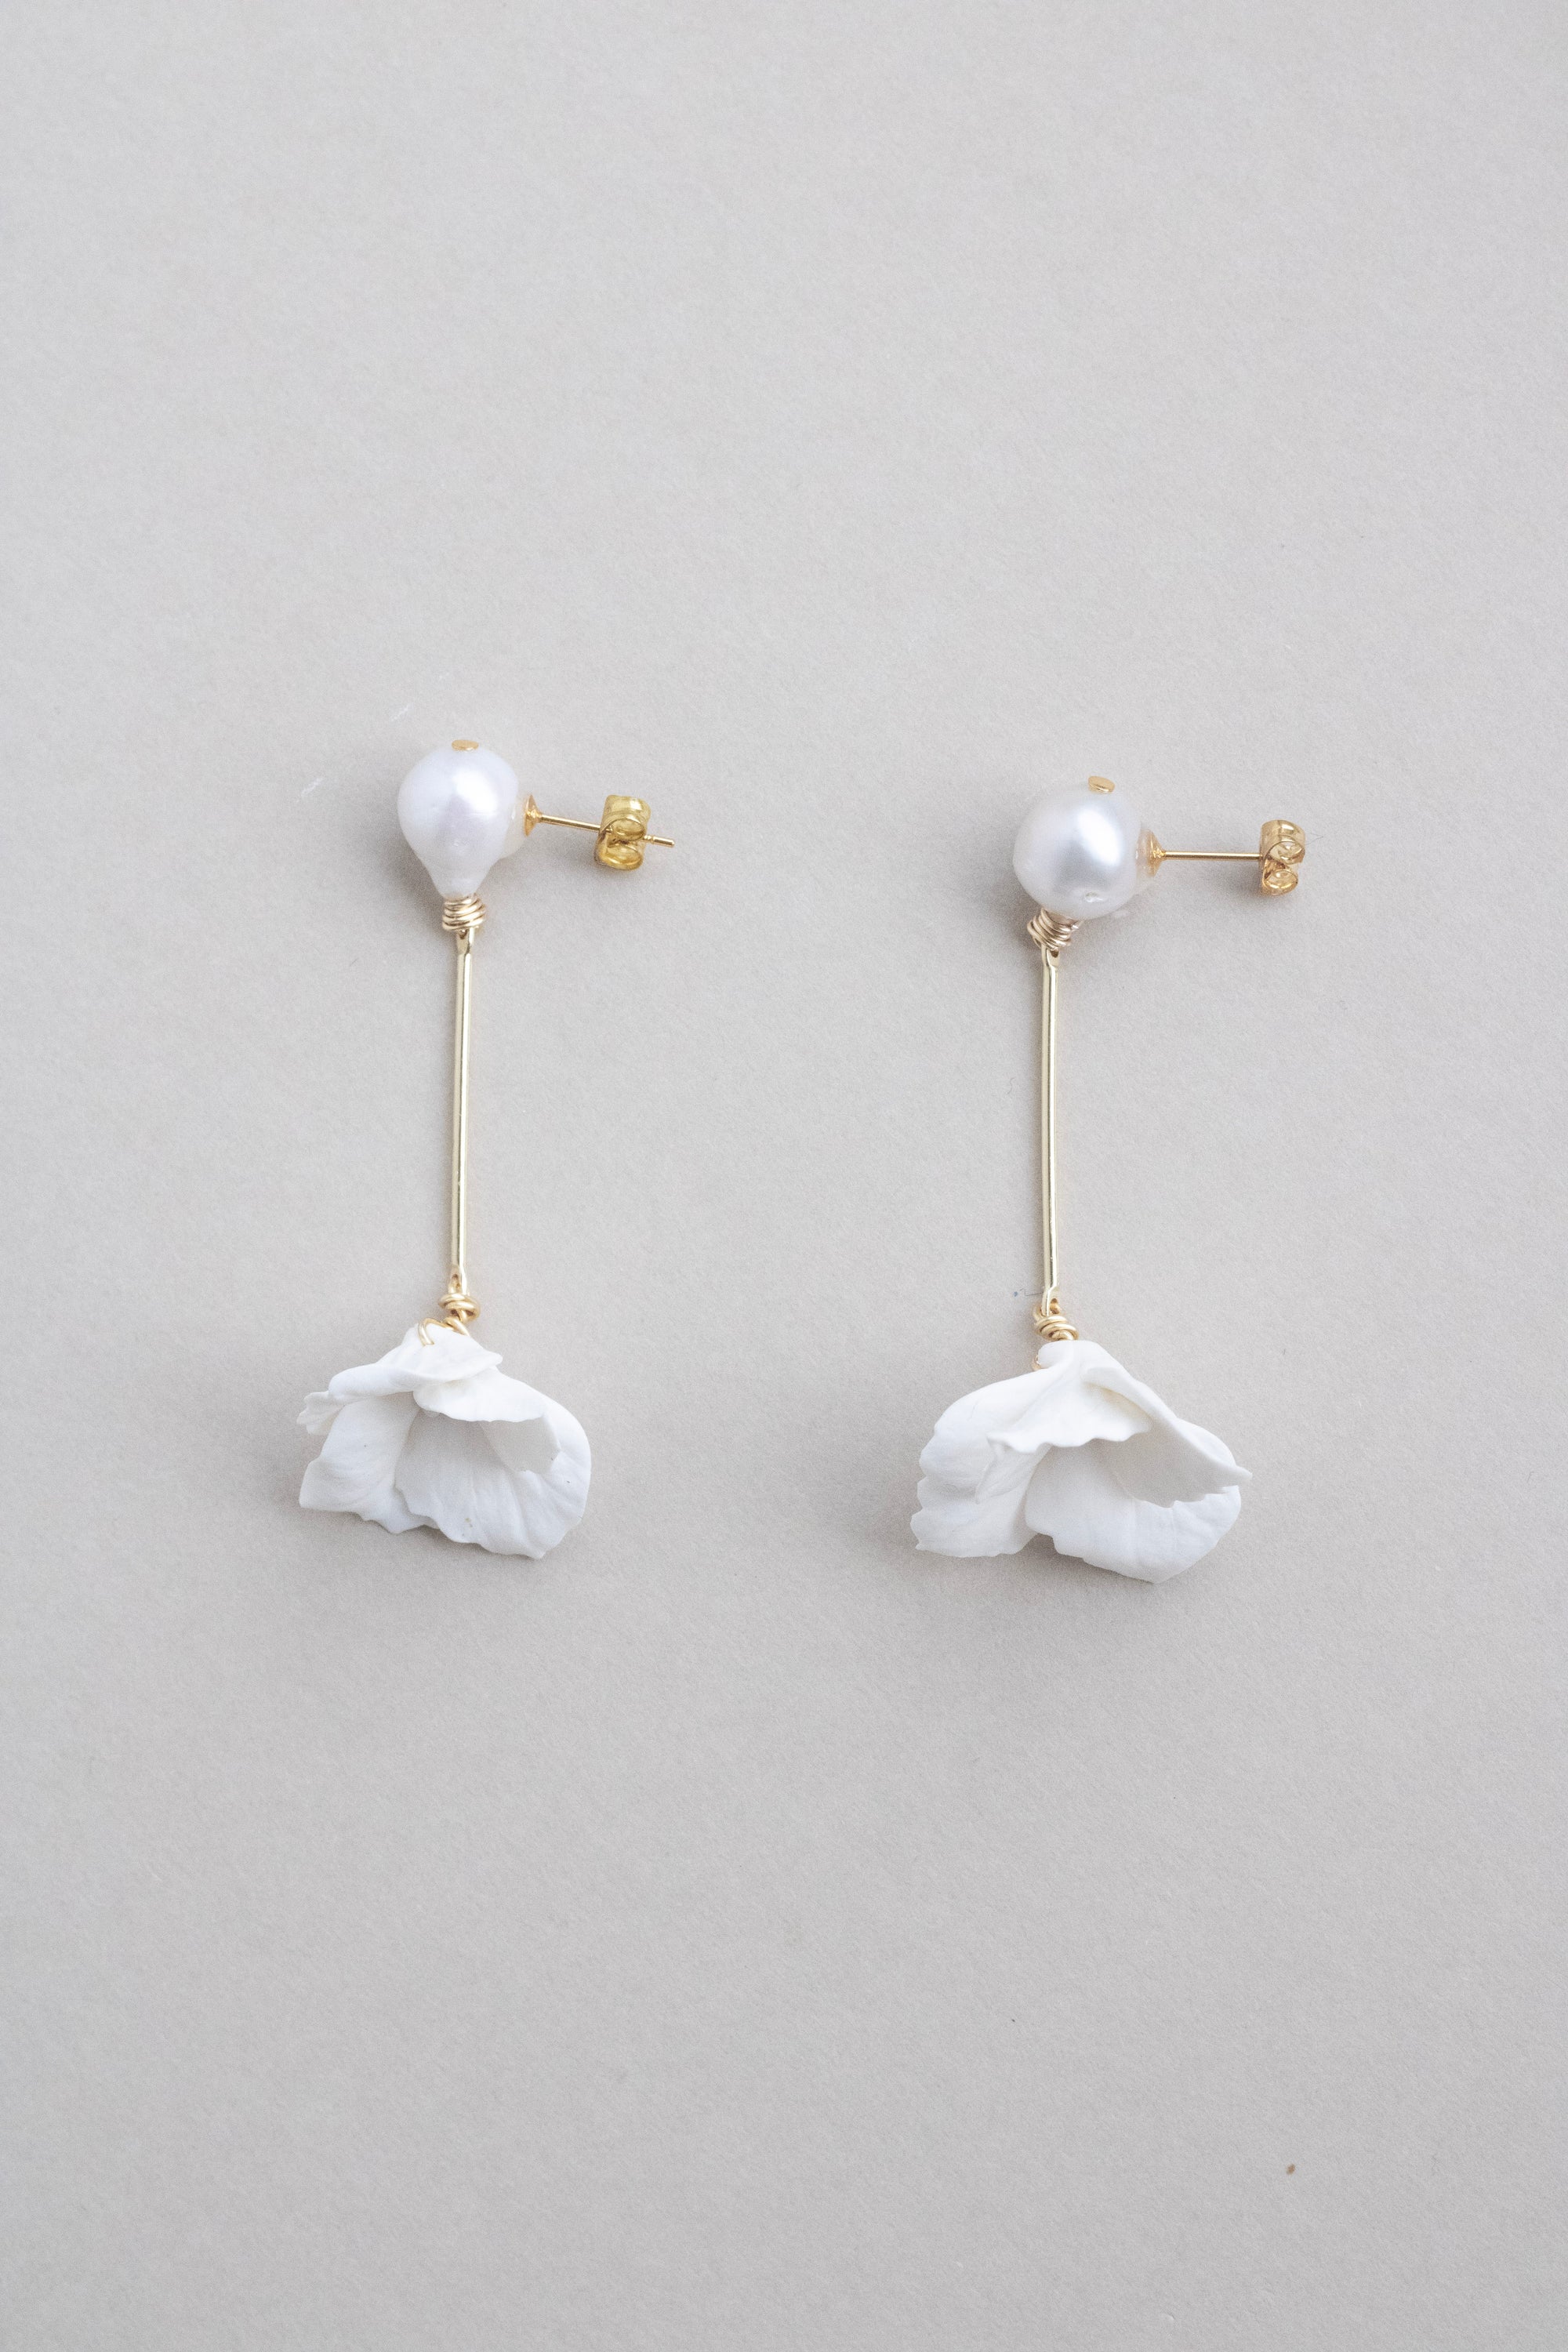 Pearl and clay flower drop earrings by megan therese